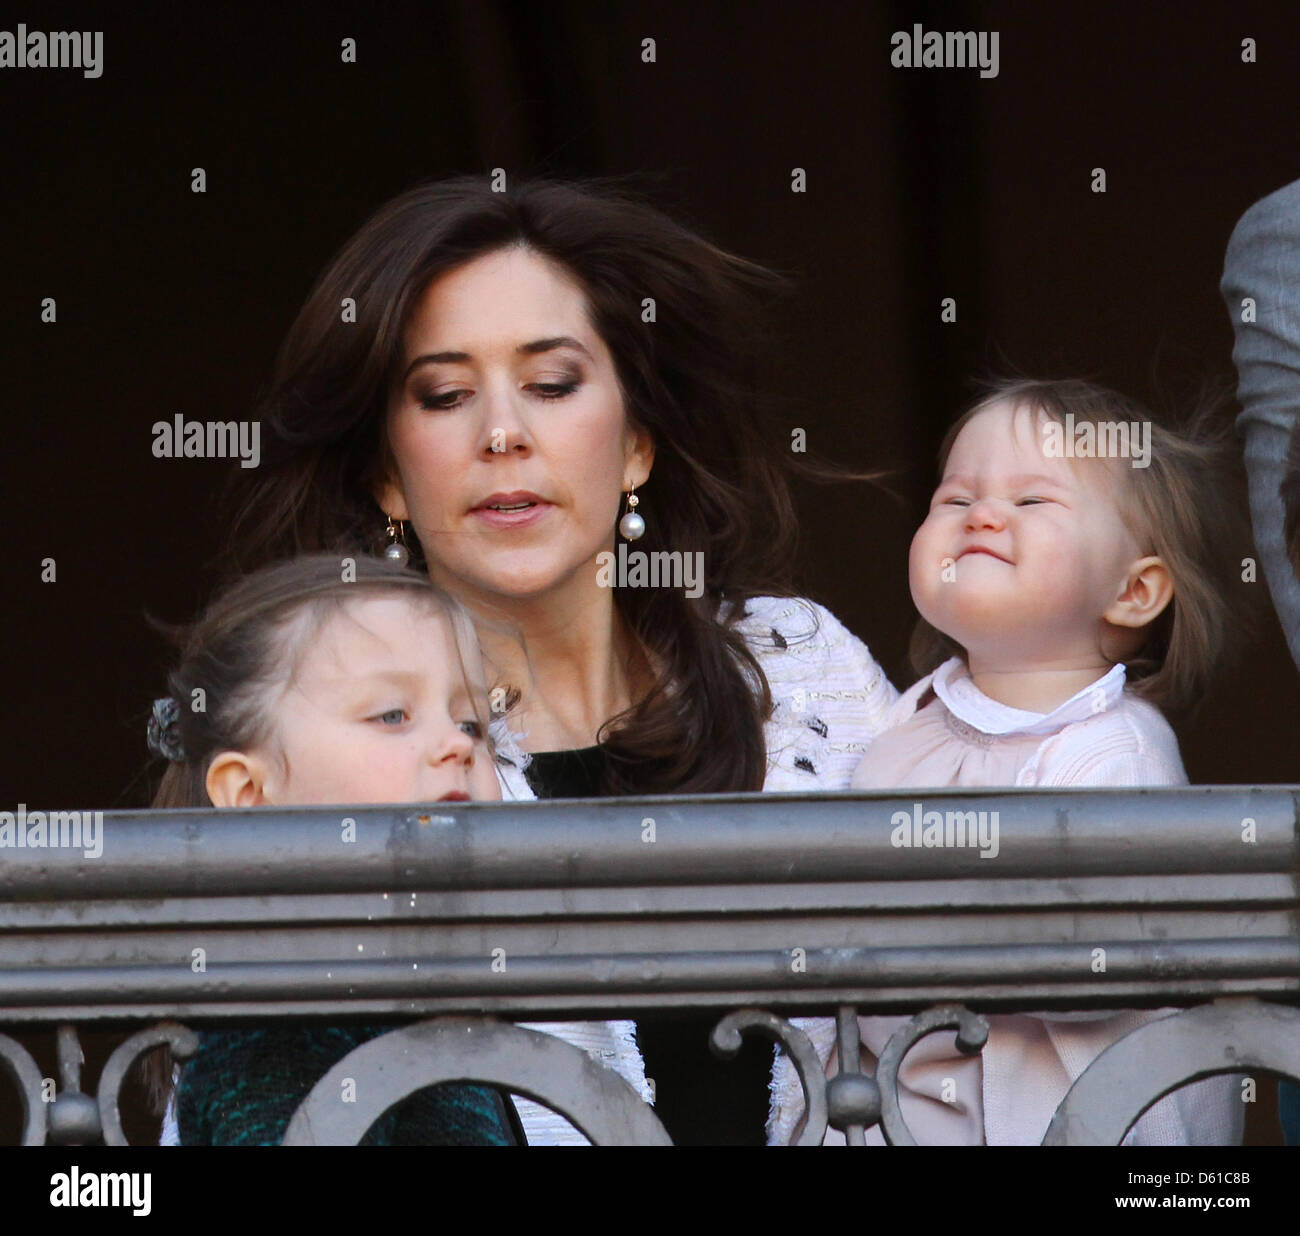 Danish Crown Princess Mary and her daughters Josephine (R) and Isabella (front) stand on the balcony of Amalienborg Palace to celebrate the 72nd birthday of Queen Margrethe in Copenhagen, Denmark, 16 April 2012. Photo: Patrick van Katwijk NETHERLANDS OUT Stock Photo